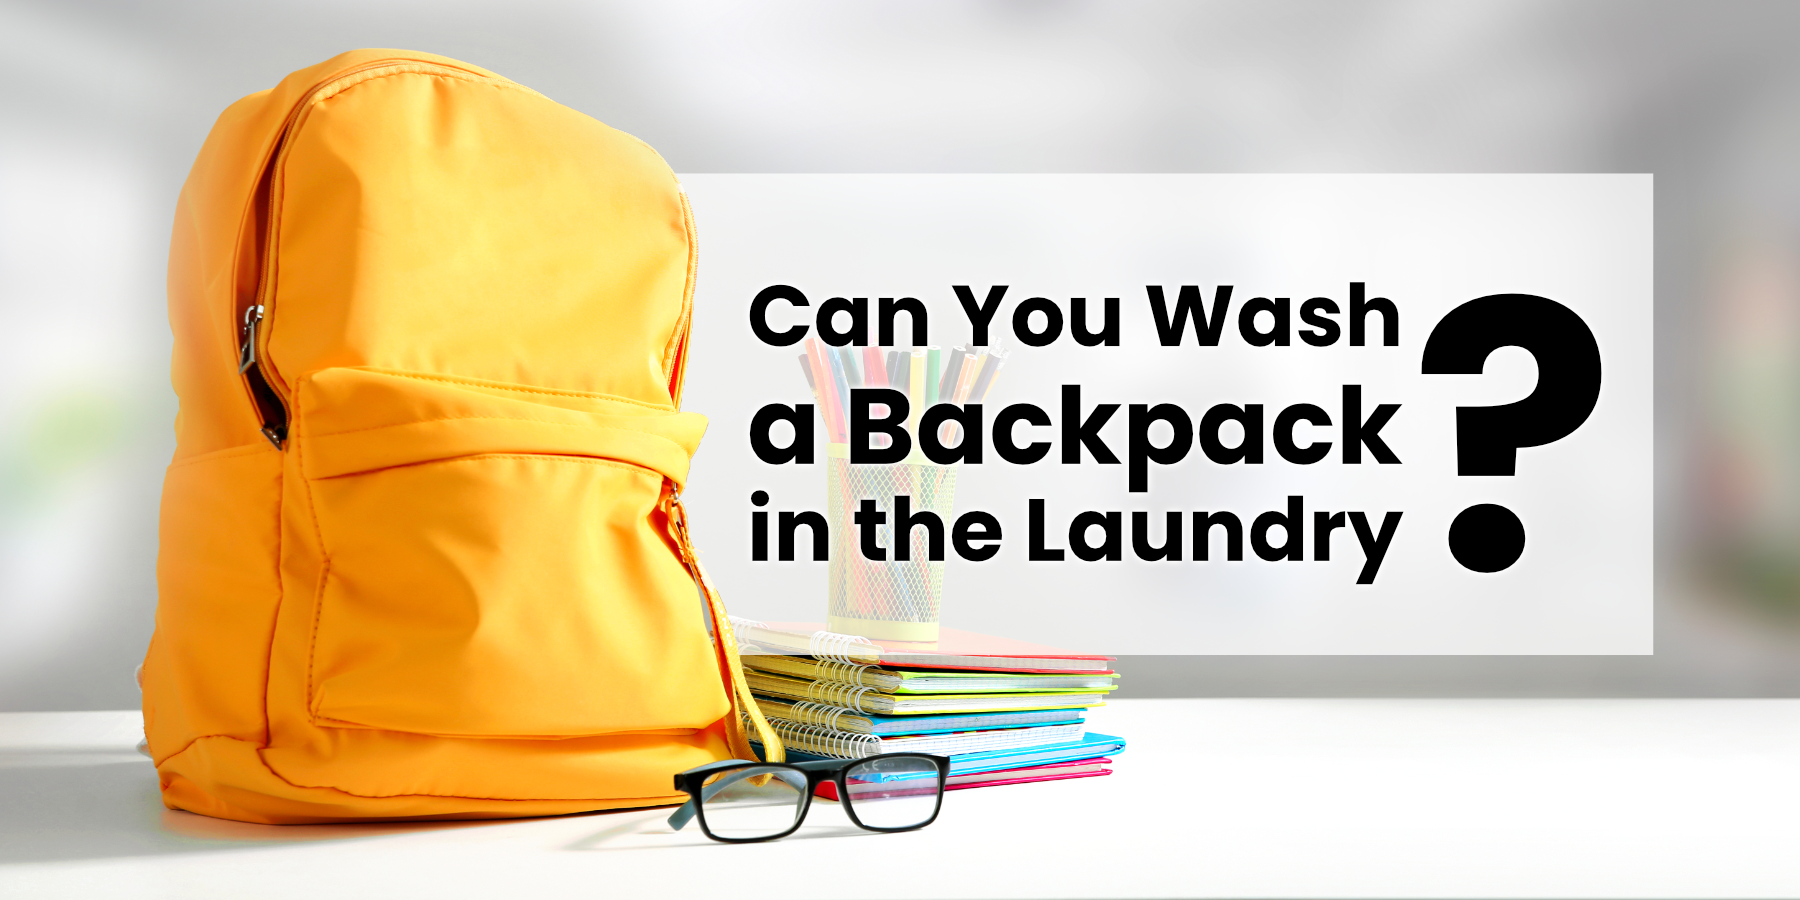 Can You Wash Backpack In Laundry